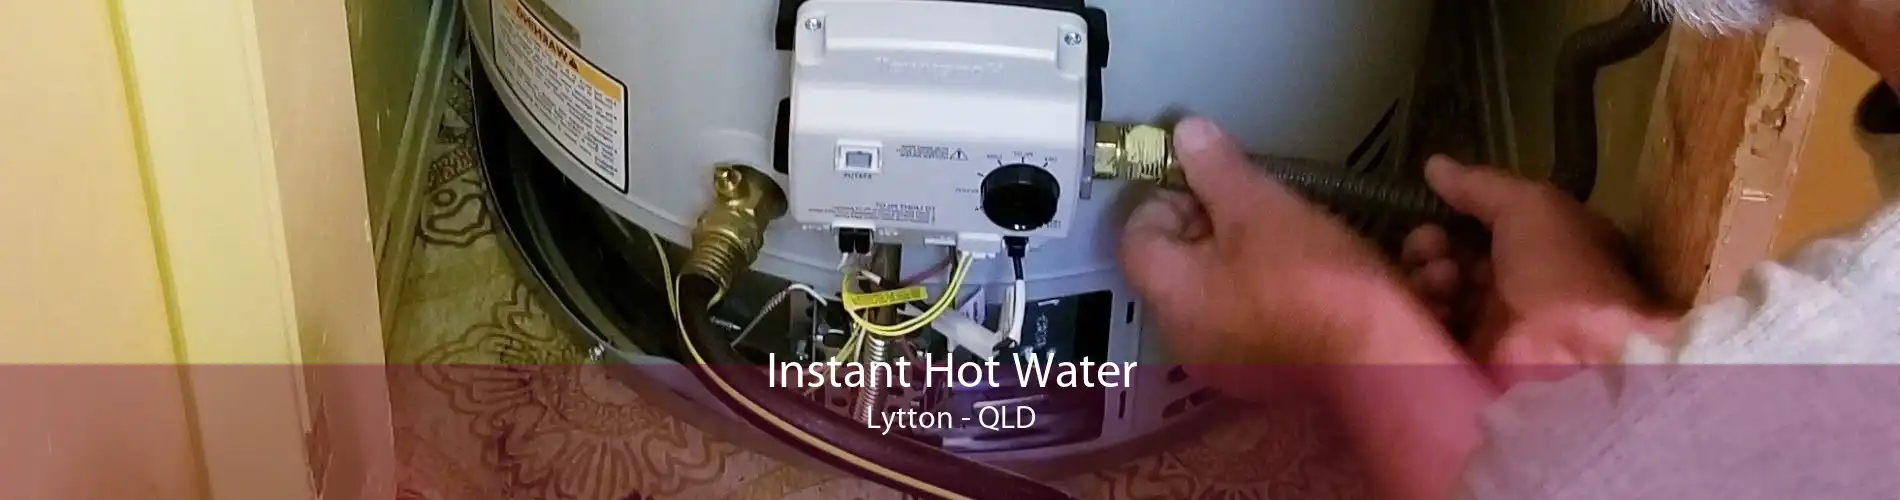 Instant Hot Water Lytton - QLD